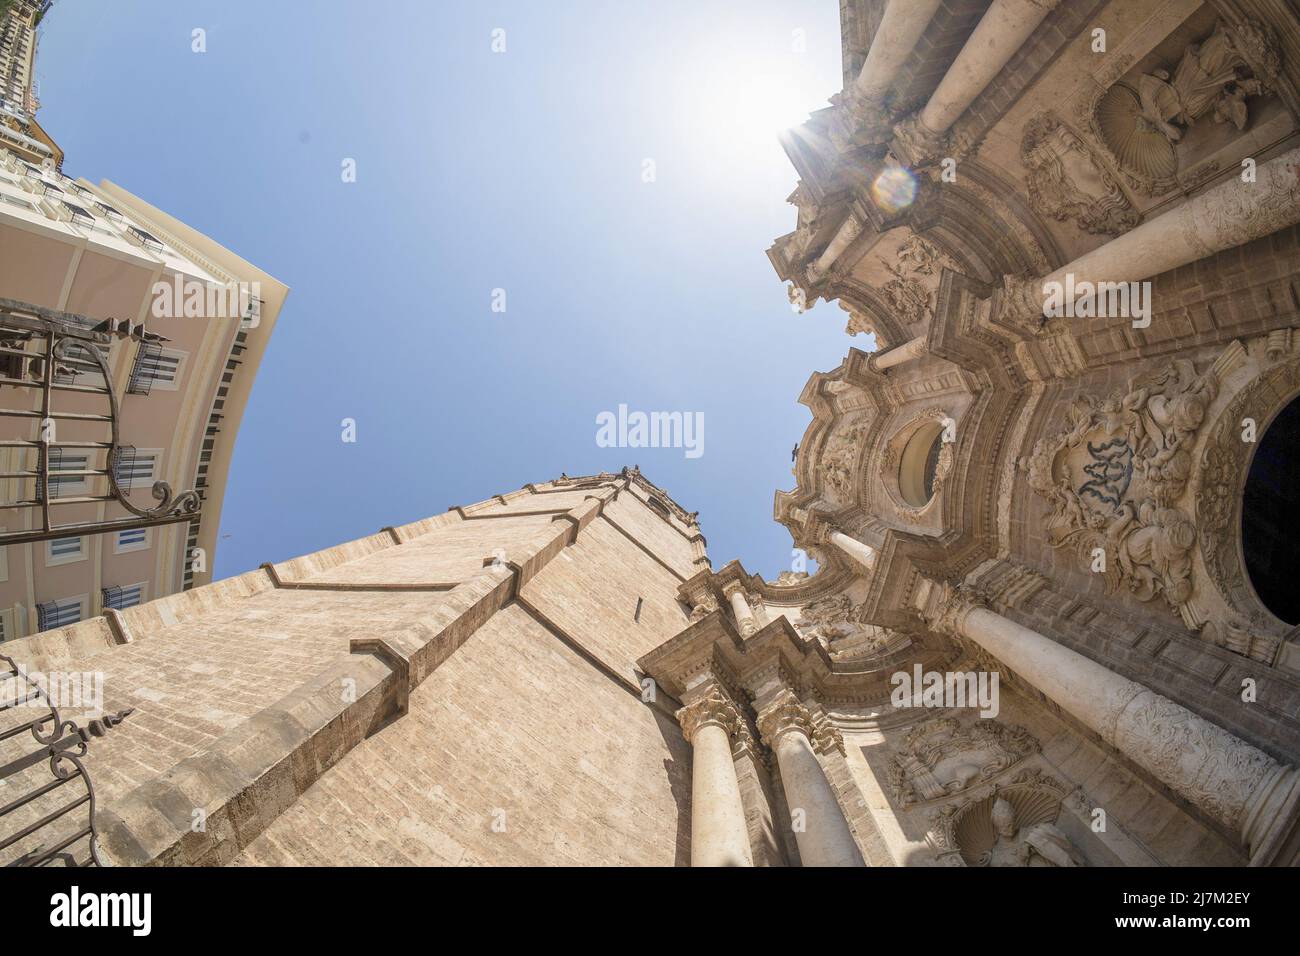 Valencia Spain historic gothic cathedral church Stock Photo